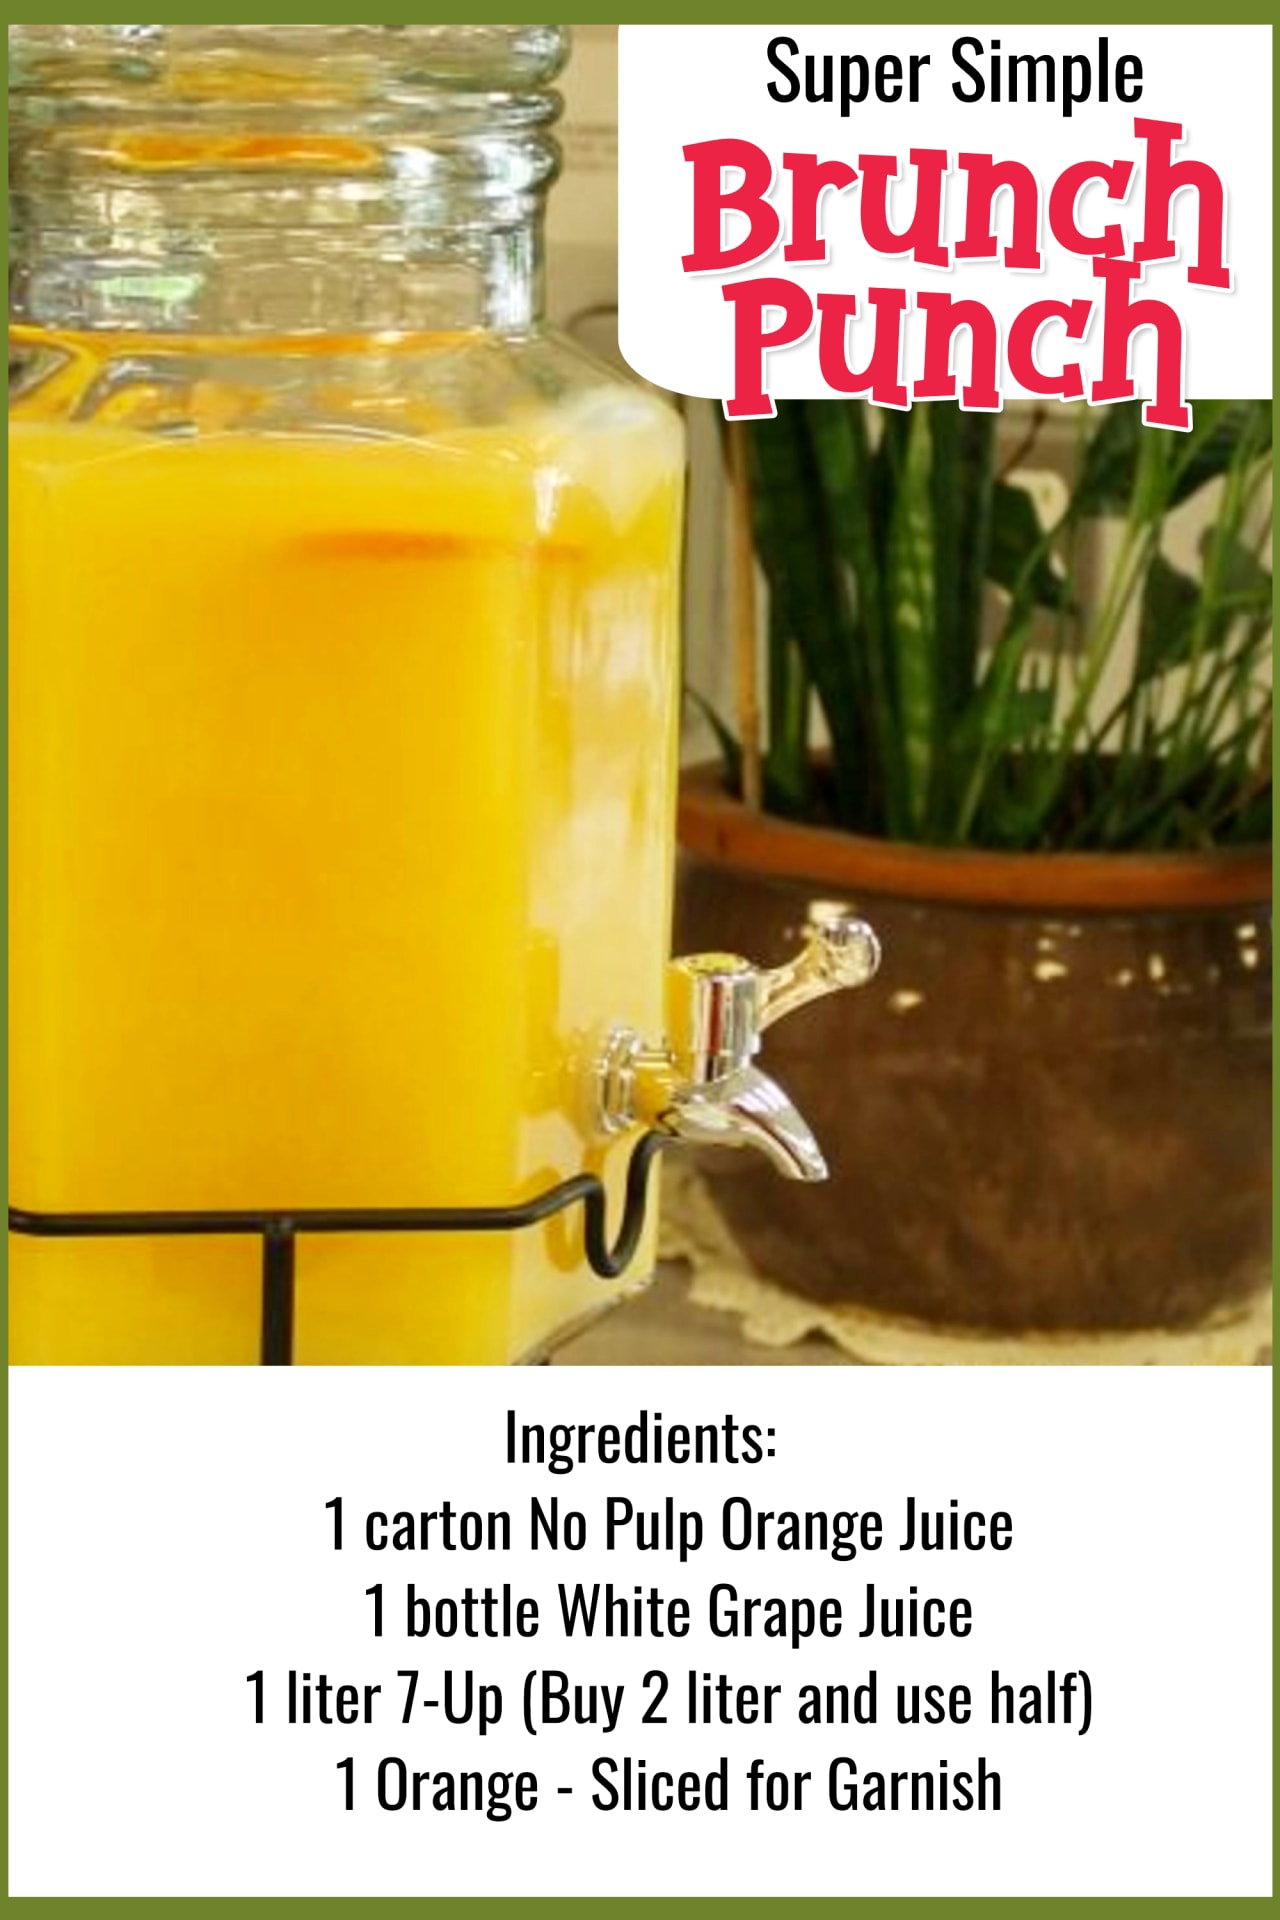 Easy Brunch Punch Recipe for a crowd - Easy Punch Recipes for a Crowd and Easy Party Drinks Ideas - Cranberry Vodka Punch, Pineapple Orange Juice Alcoholic Drinks, Punch for 50 and Simple Punch Recipes for a Crowd, Party, Brunch, Cookout or Bridal Shower - non-alcoholic punch recipes and simple alcoholic punch recipes, non-alcoholic holiday punch, easy fruit punch recipes, easy punch recipes with sprite and pineapple juice, jungle juice recipe with fruit